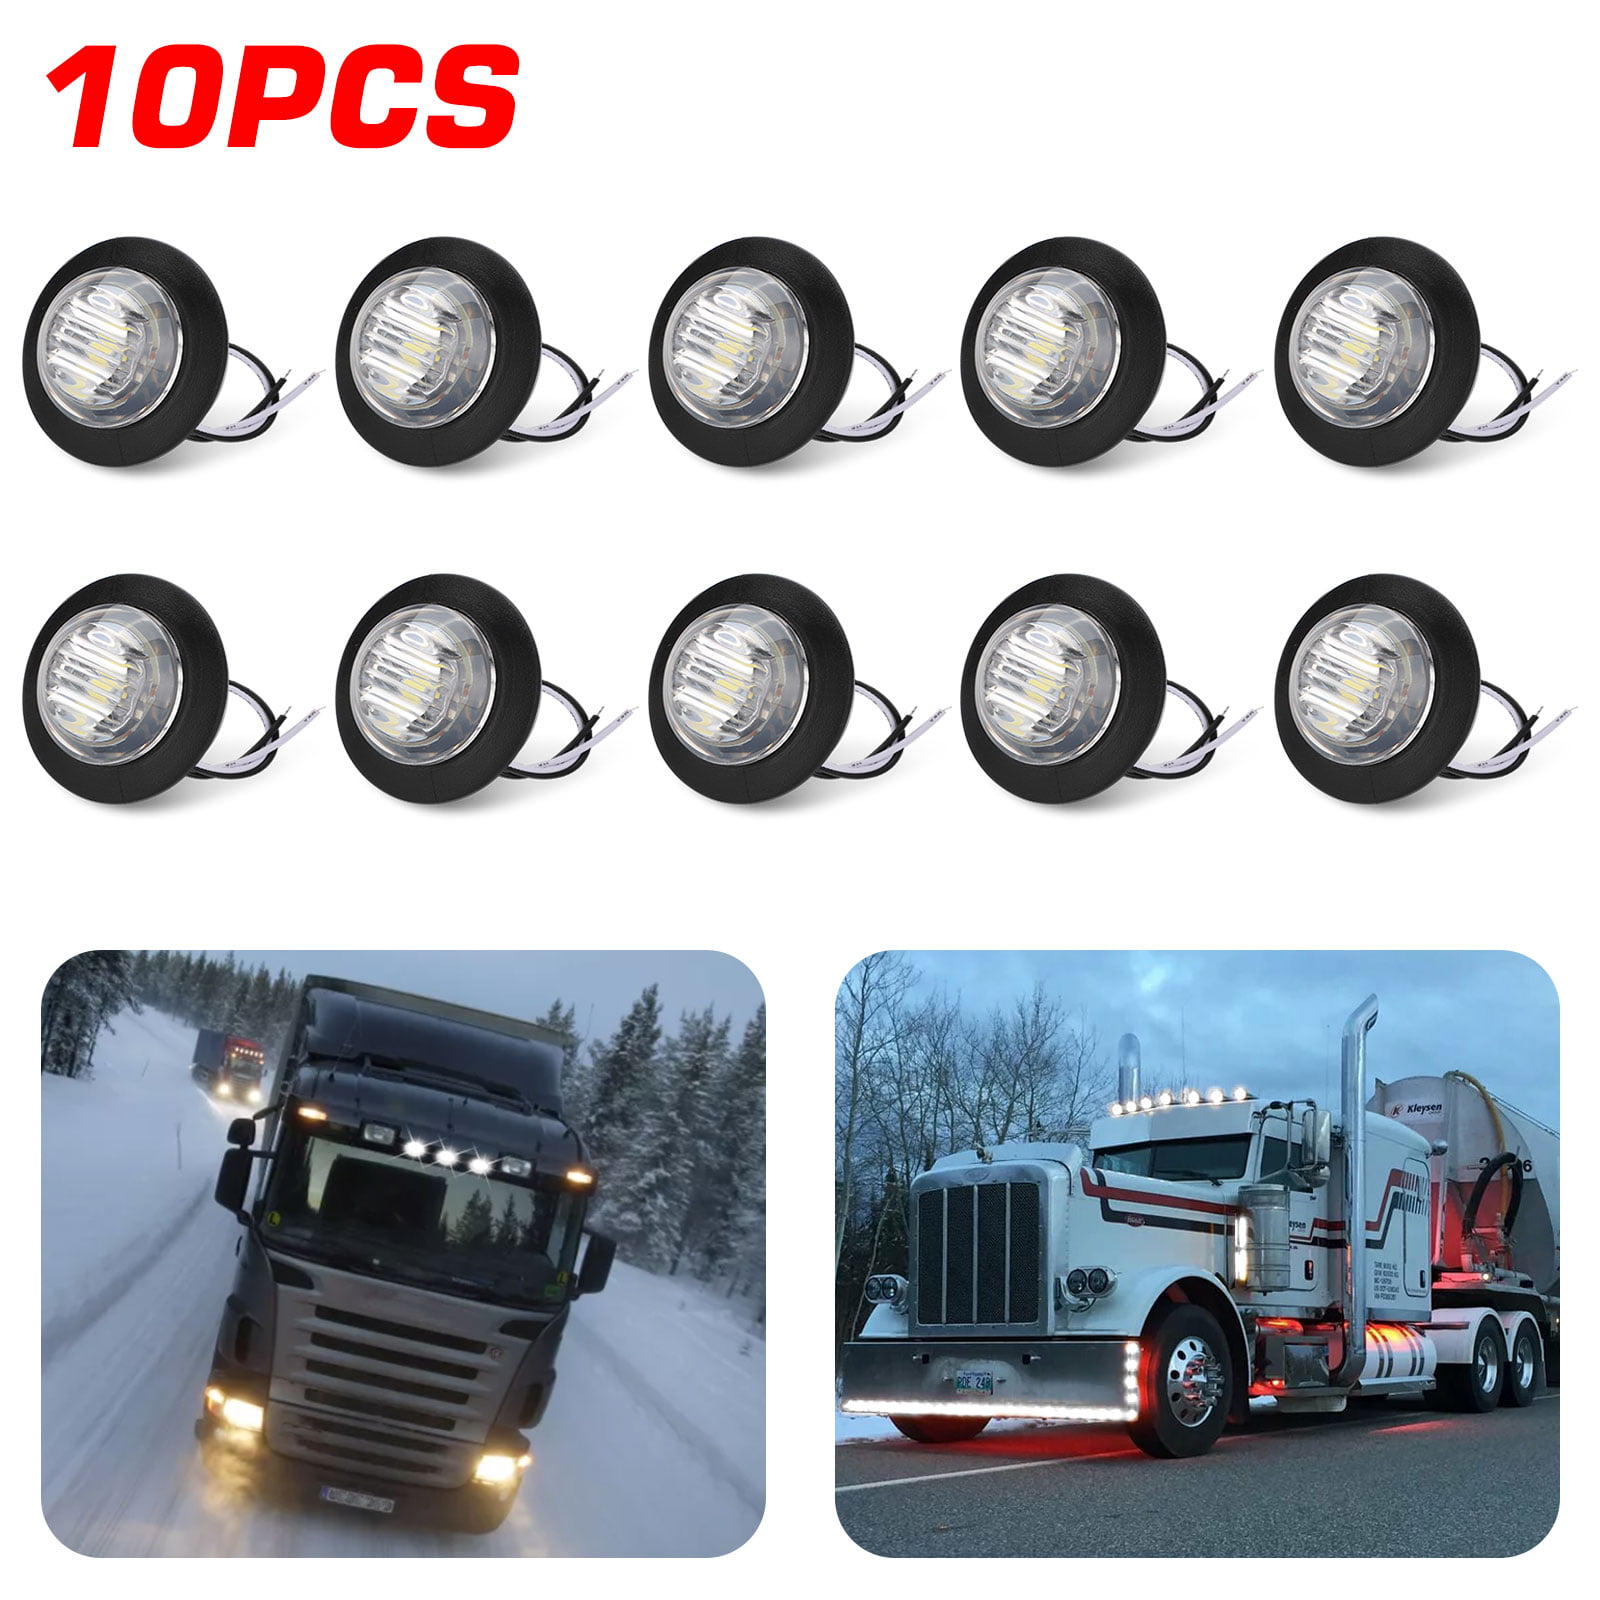 2x White 9W High Power LED Rock Rig Light Kit for Jeep Truck SUV Off-Road Boat 